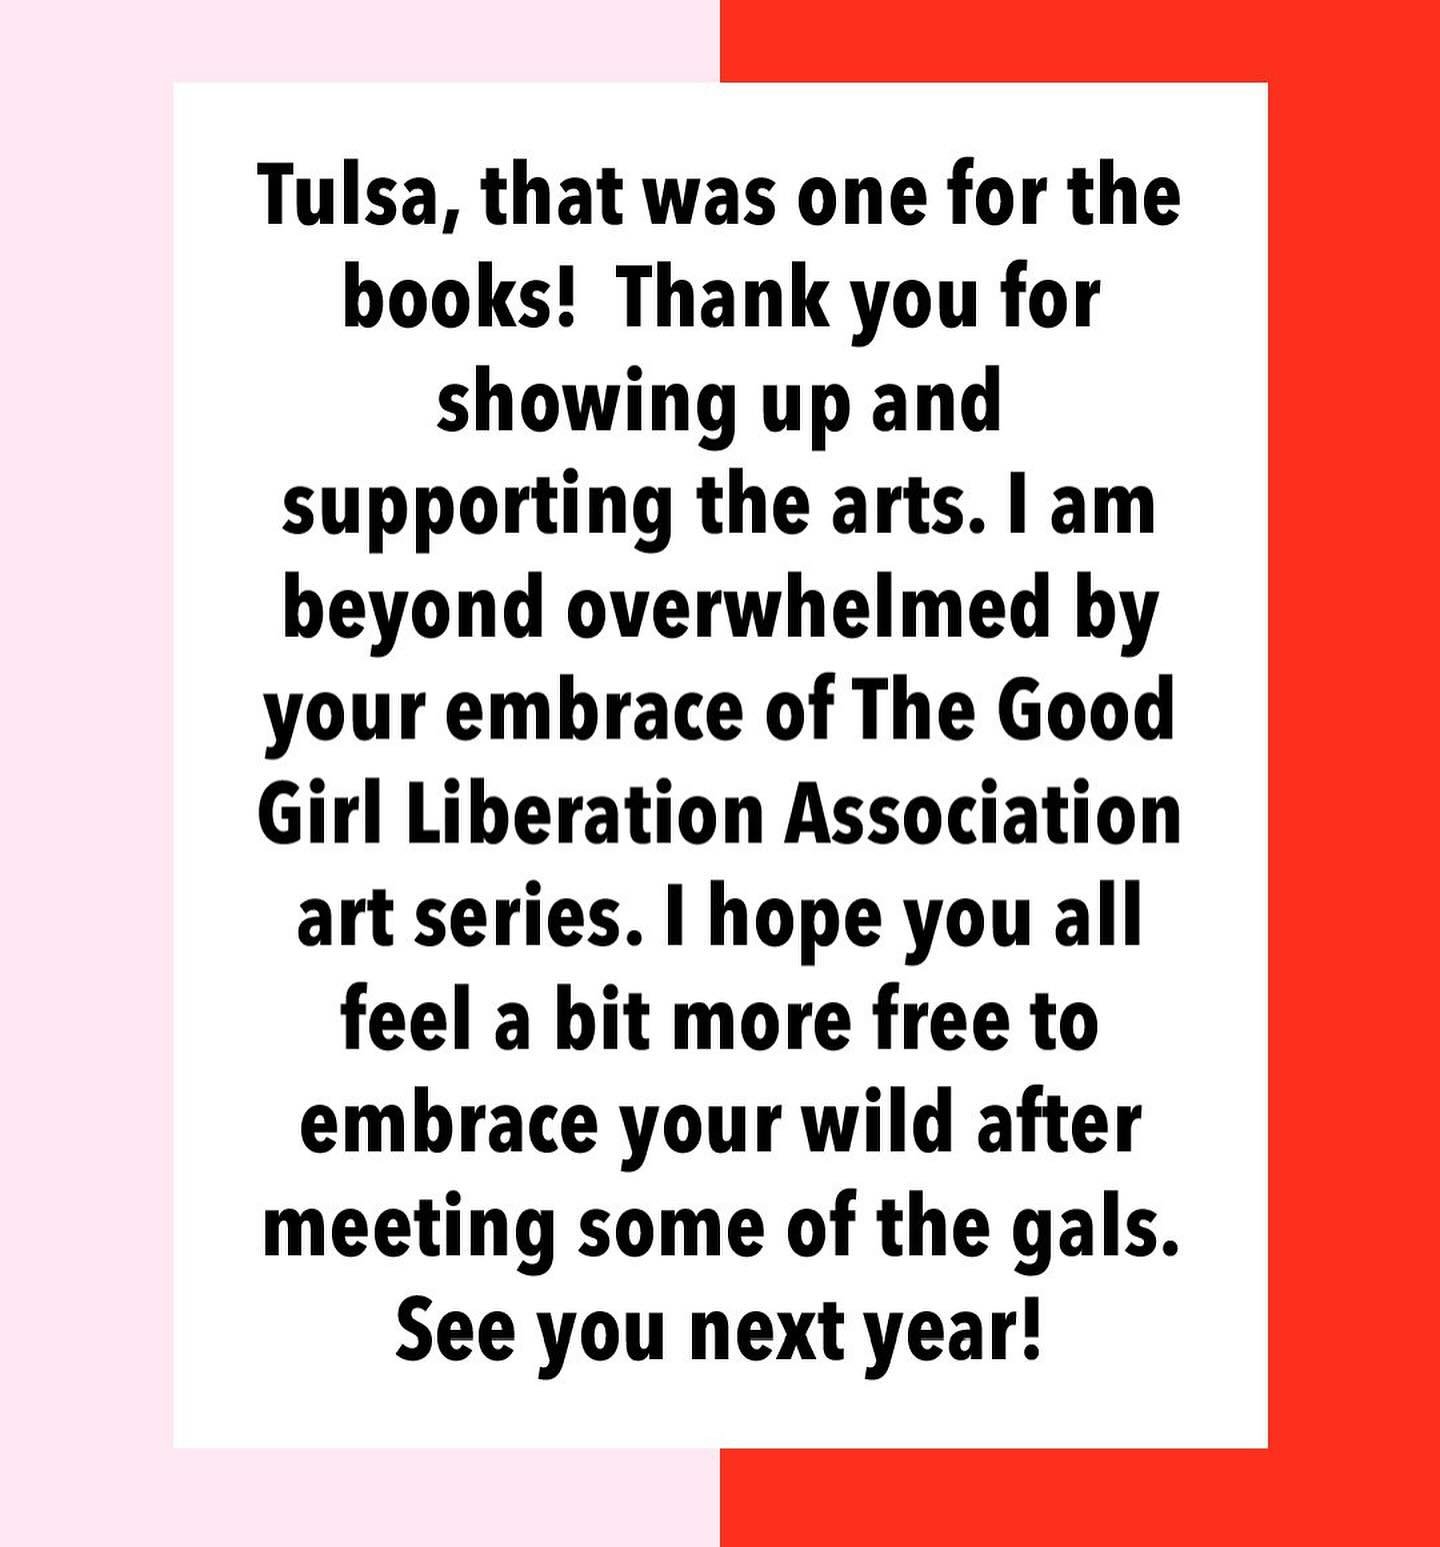 Tulsa, that was one for the books!  Thank you for showing up and supporting the arts. I am beyond overwhelmed by your love for the Good Girl Liberation Association art series. I hope you all feel a bit more free to embrace your wild after meeting som